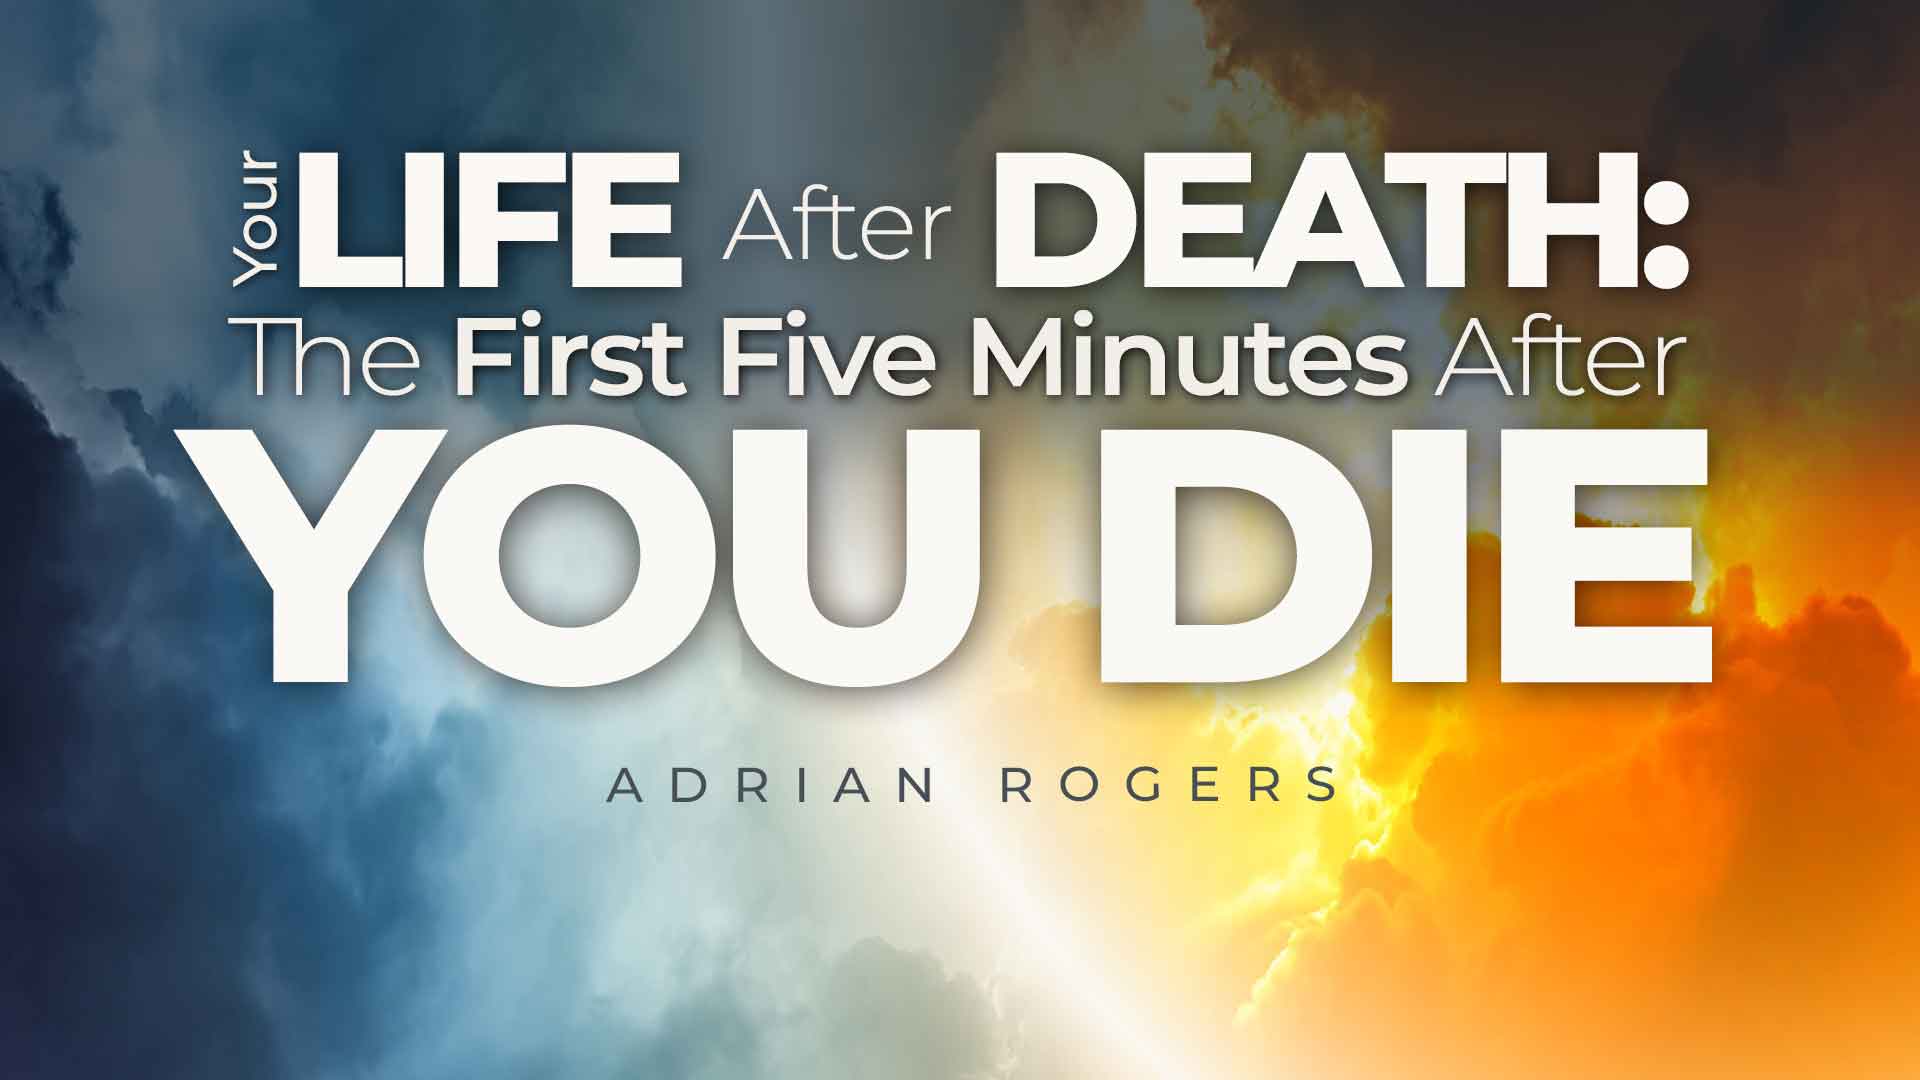 Your Life After Death 1920x1080